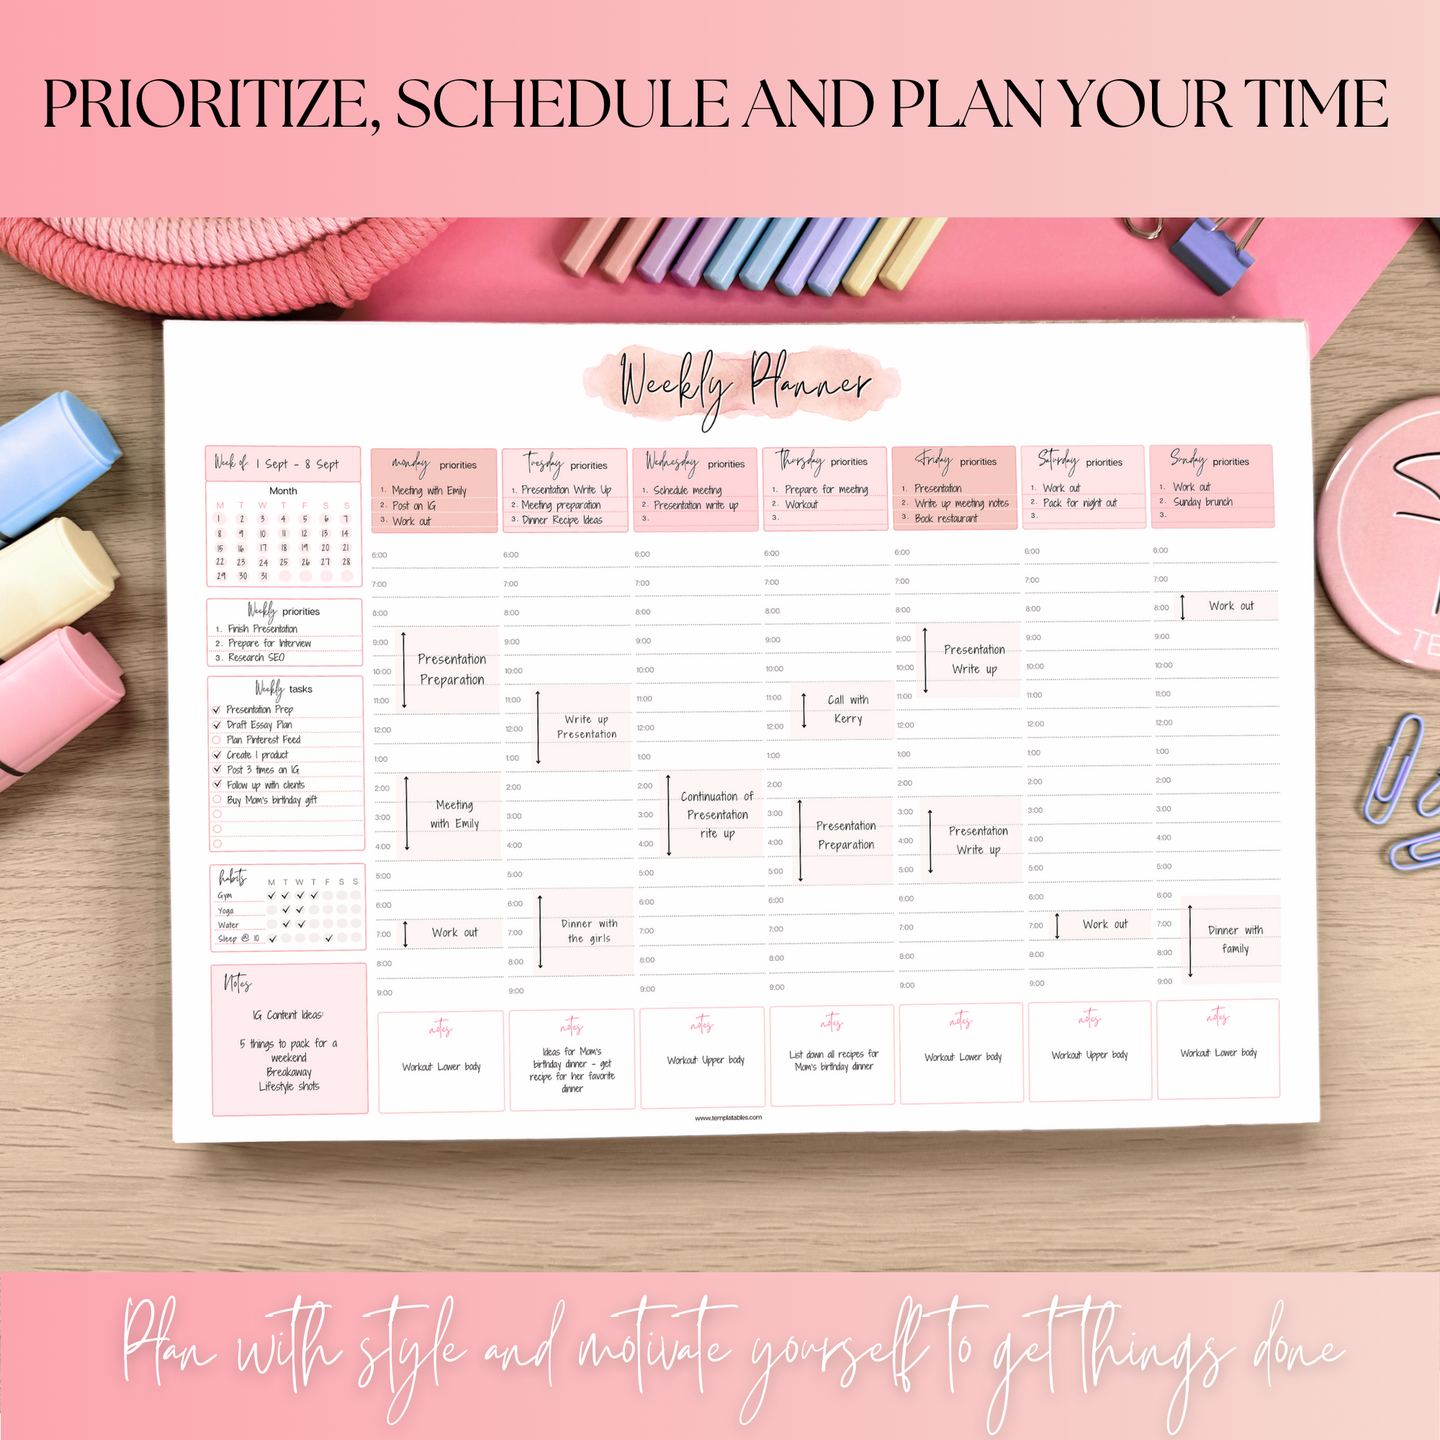 Weekly Hourly Planner Notepad, Daily Planner Desk Pad, Weekly Schedule, To Do List Note Pad, ADHD Planner | 50 Undated Tear Away Sheets A4 | Pink